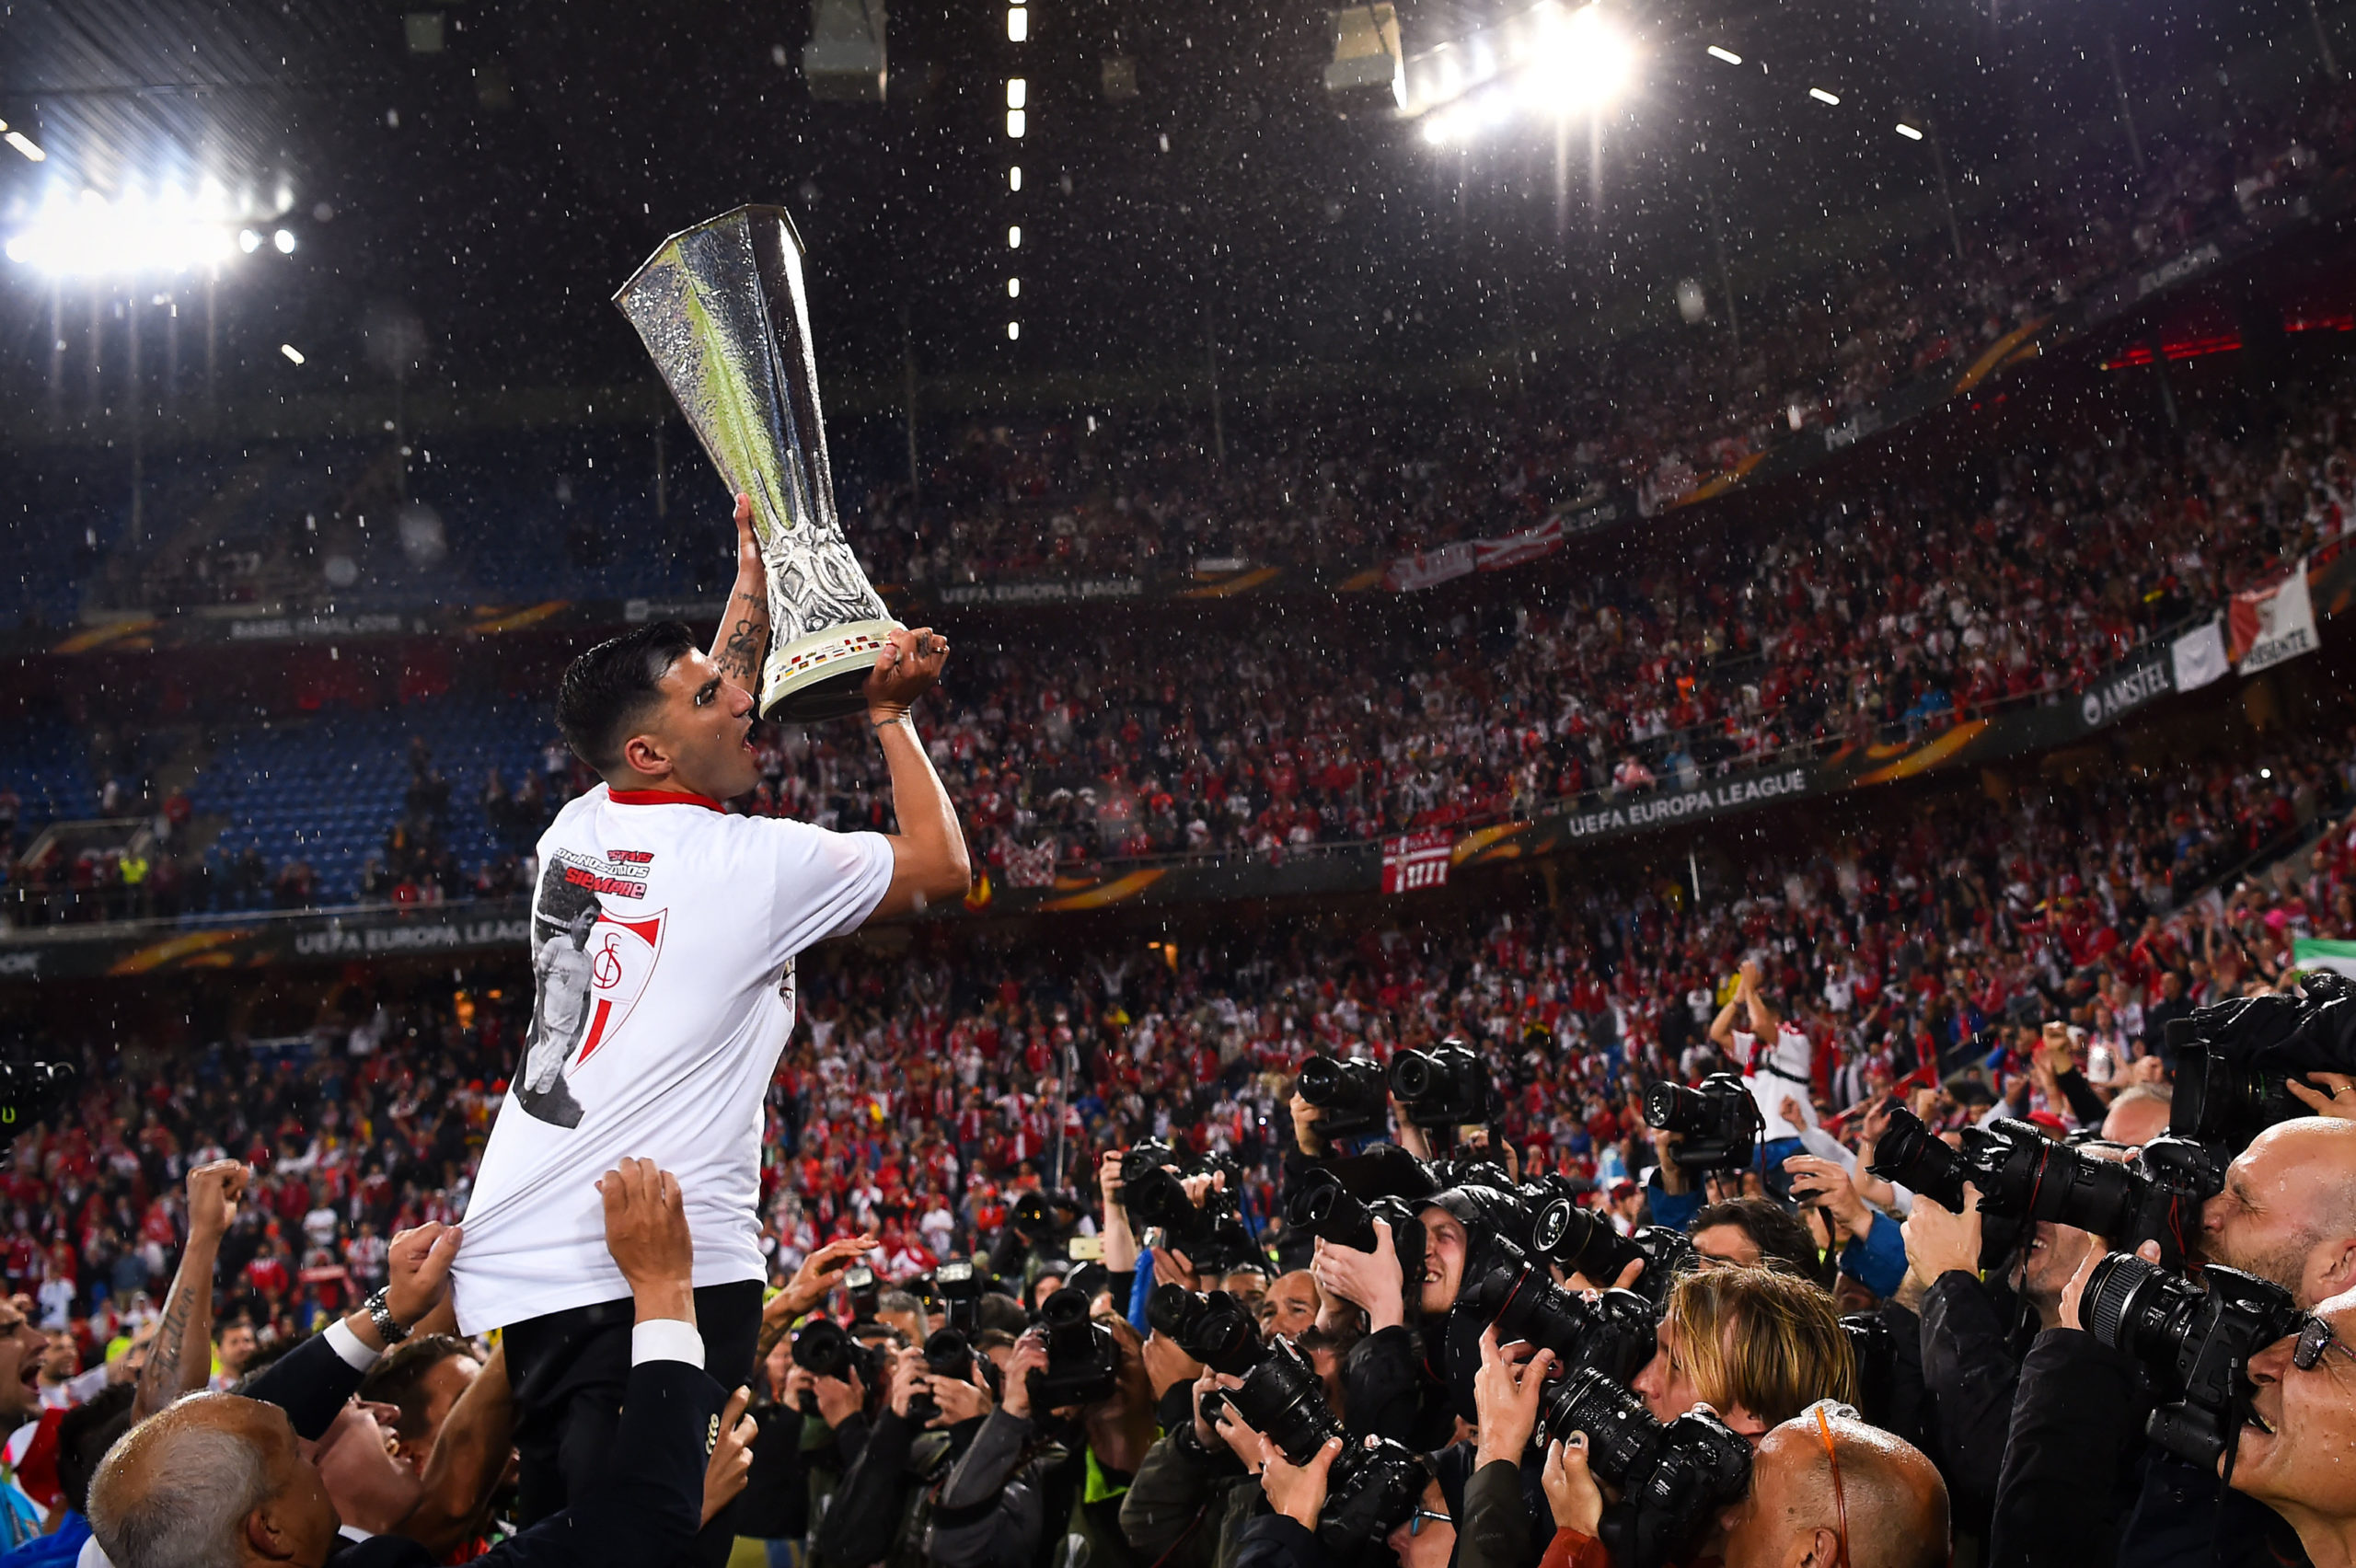 Team captain Jose Antonio Reyes of Sevilla FC poses for photographers with the trophy after the UEFA Europa League Final